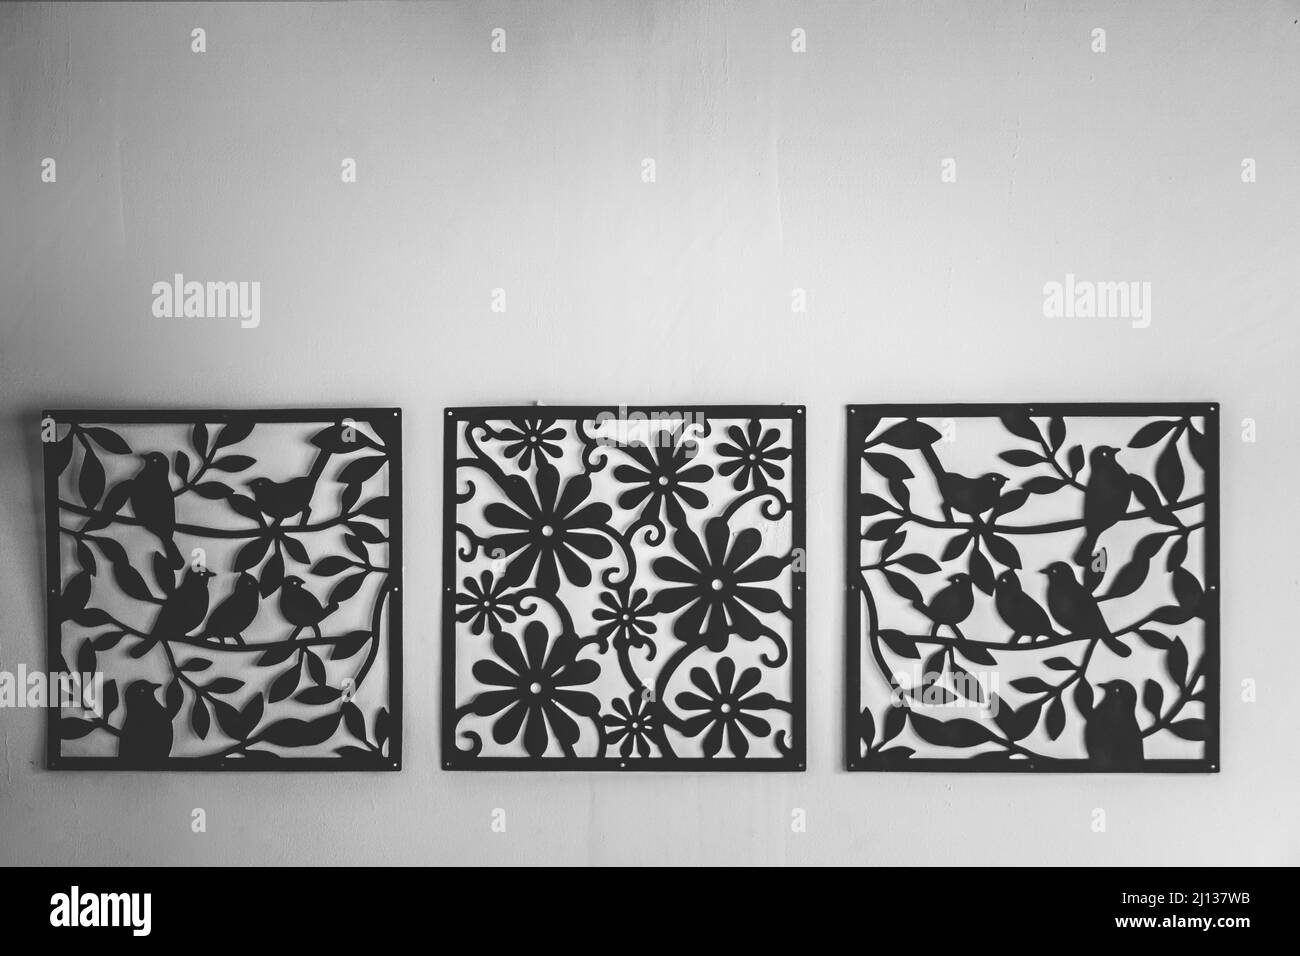 Laser cut decor Black and White Stock Photos & Images - Alamy